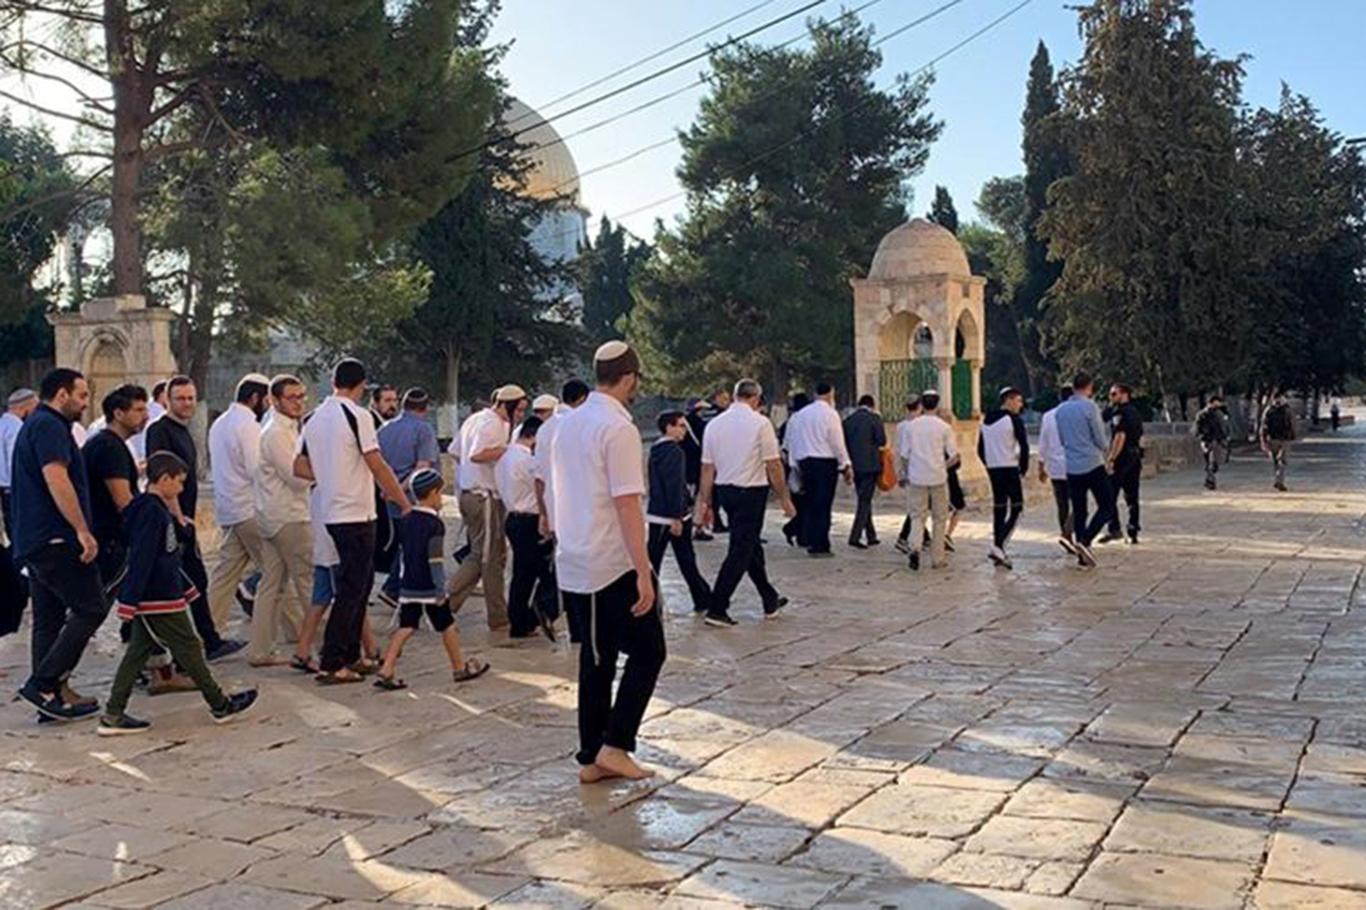 Dozens of zionist settlers defile Aqsa Mosque under police guard